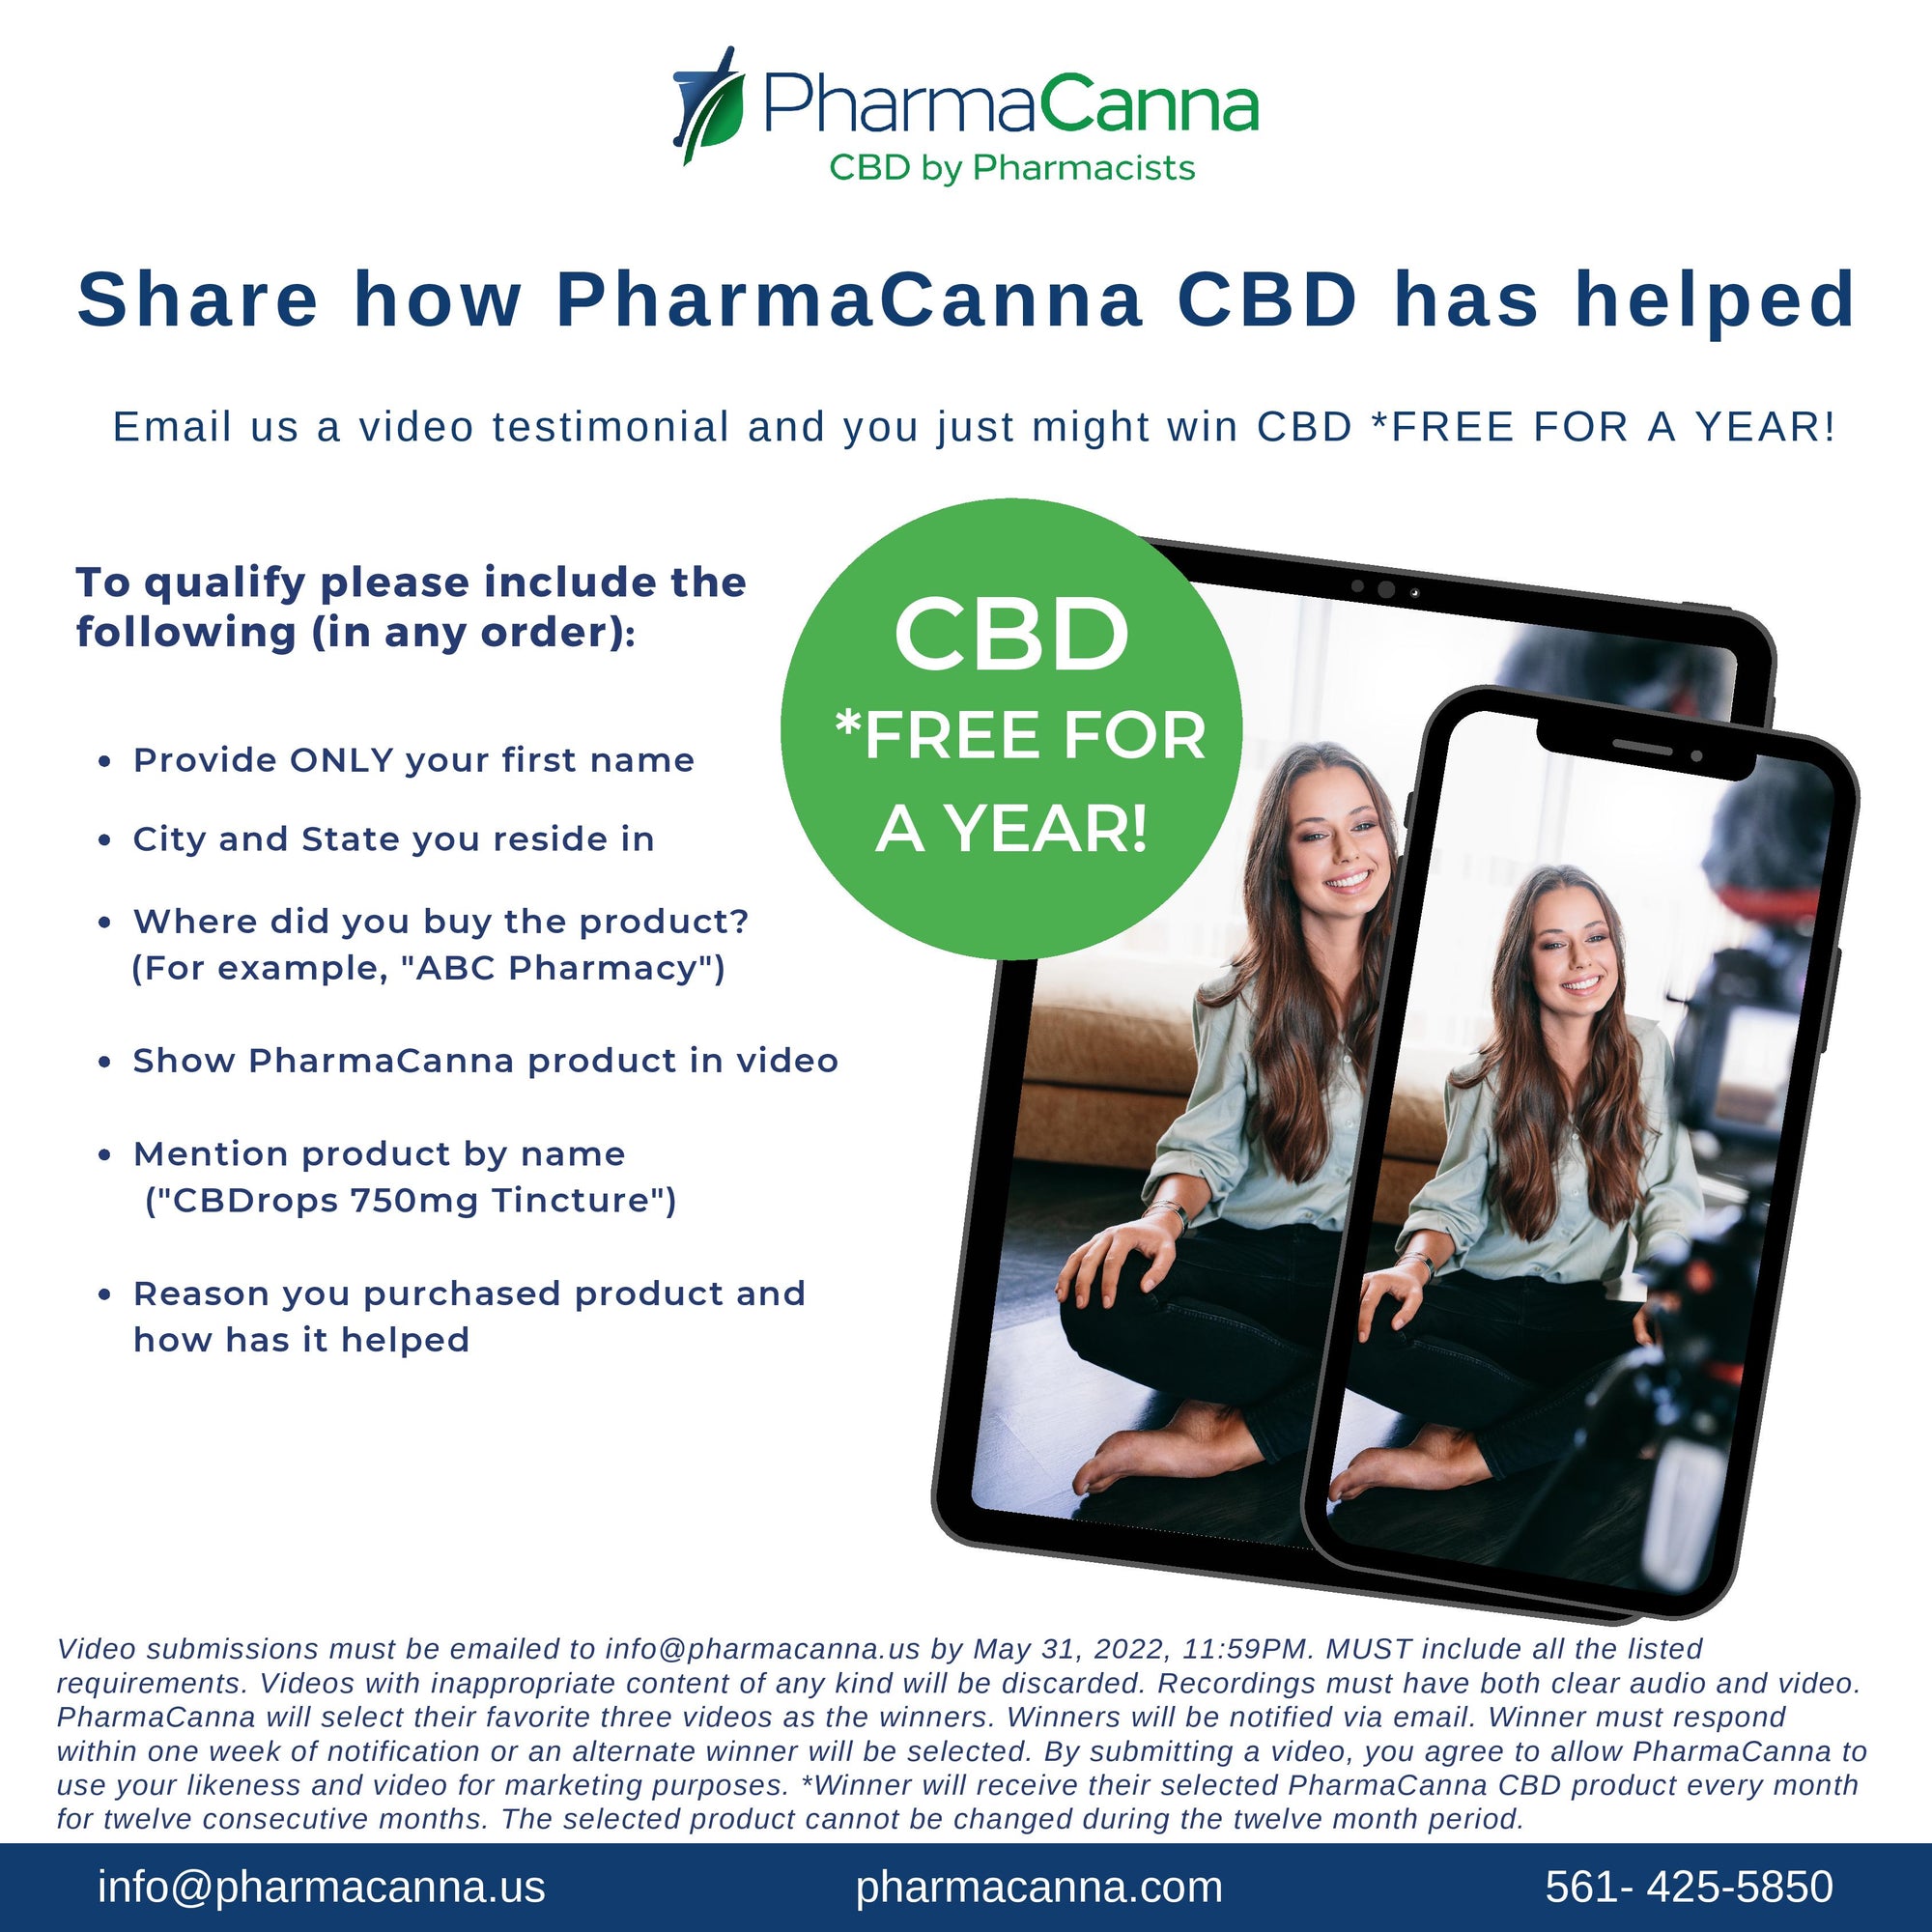 WIN FREE CBD FOR A YEAR - VIDEO